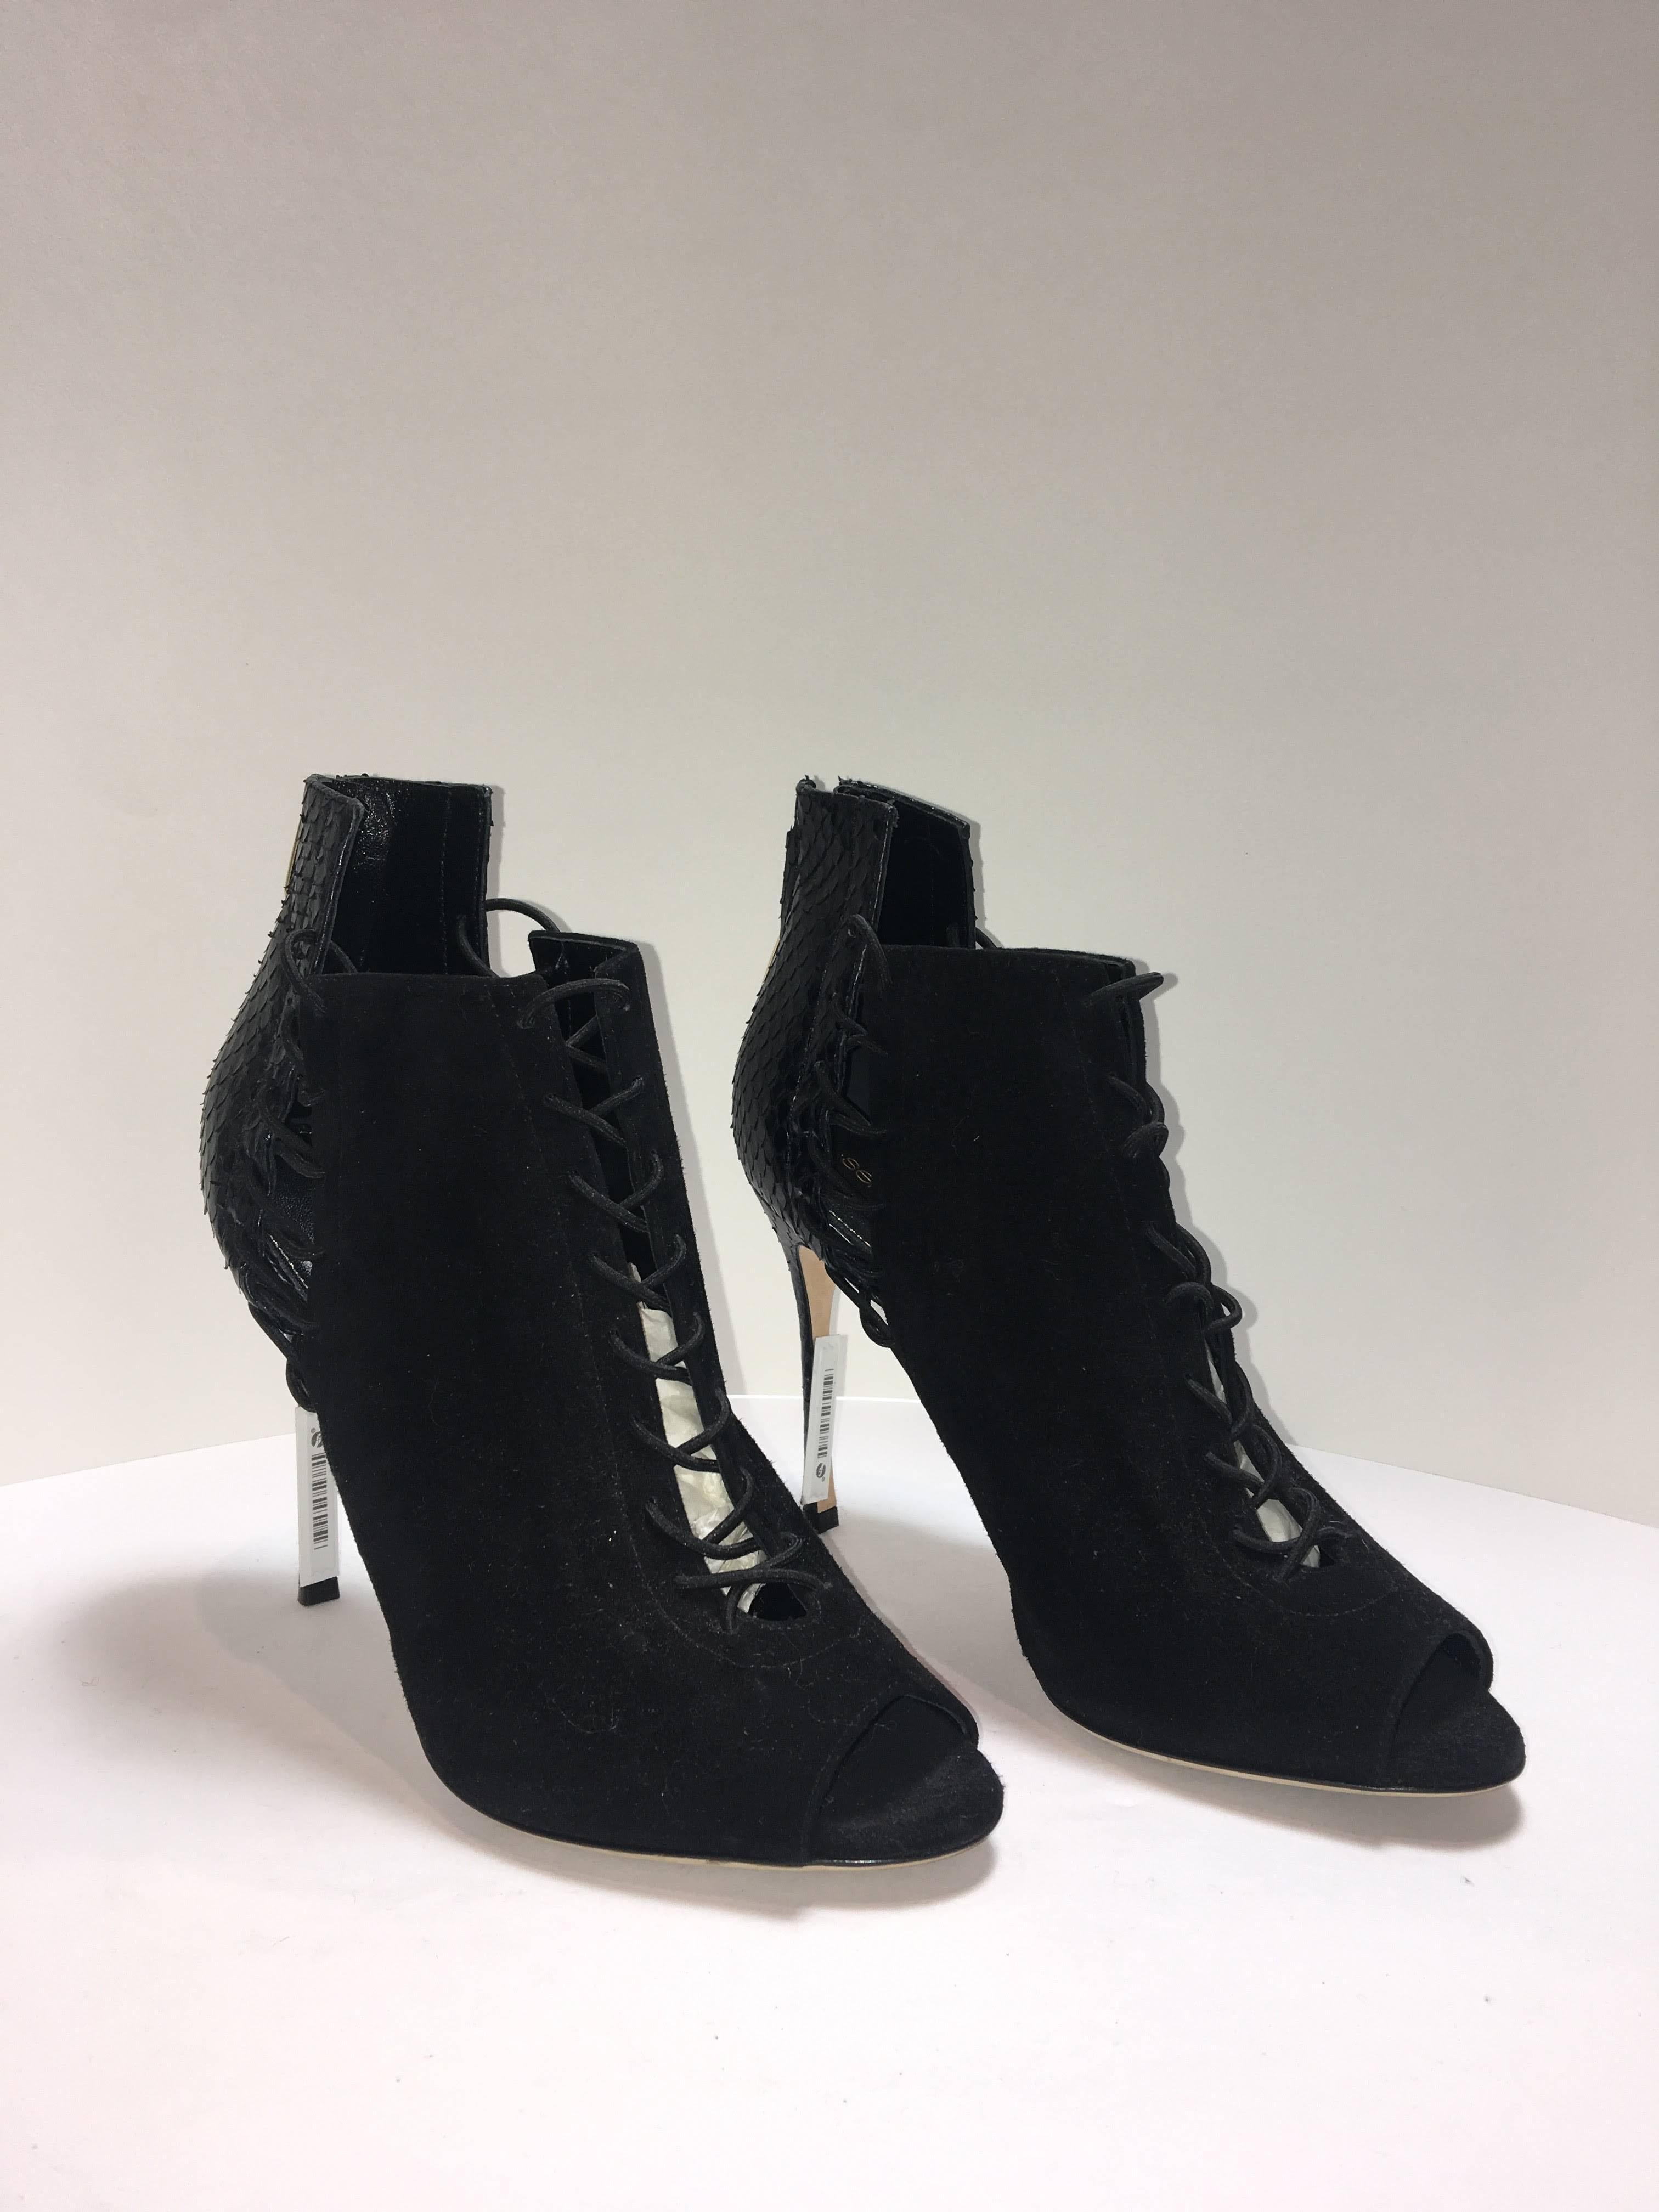 Sergio Rossi Open Toed Booties in Black Leather. Python details with criss-cross lace up. 